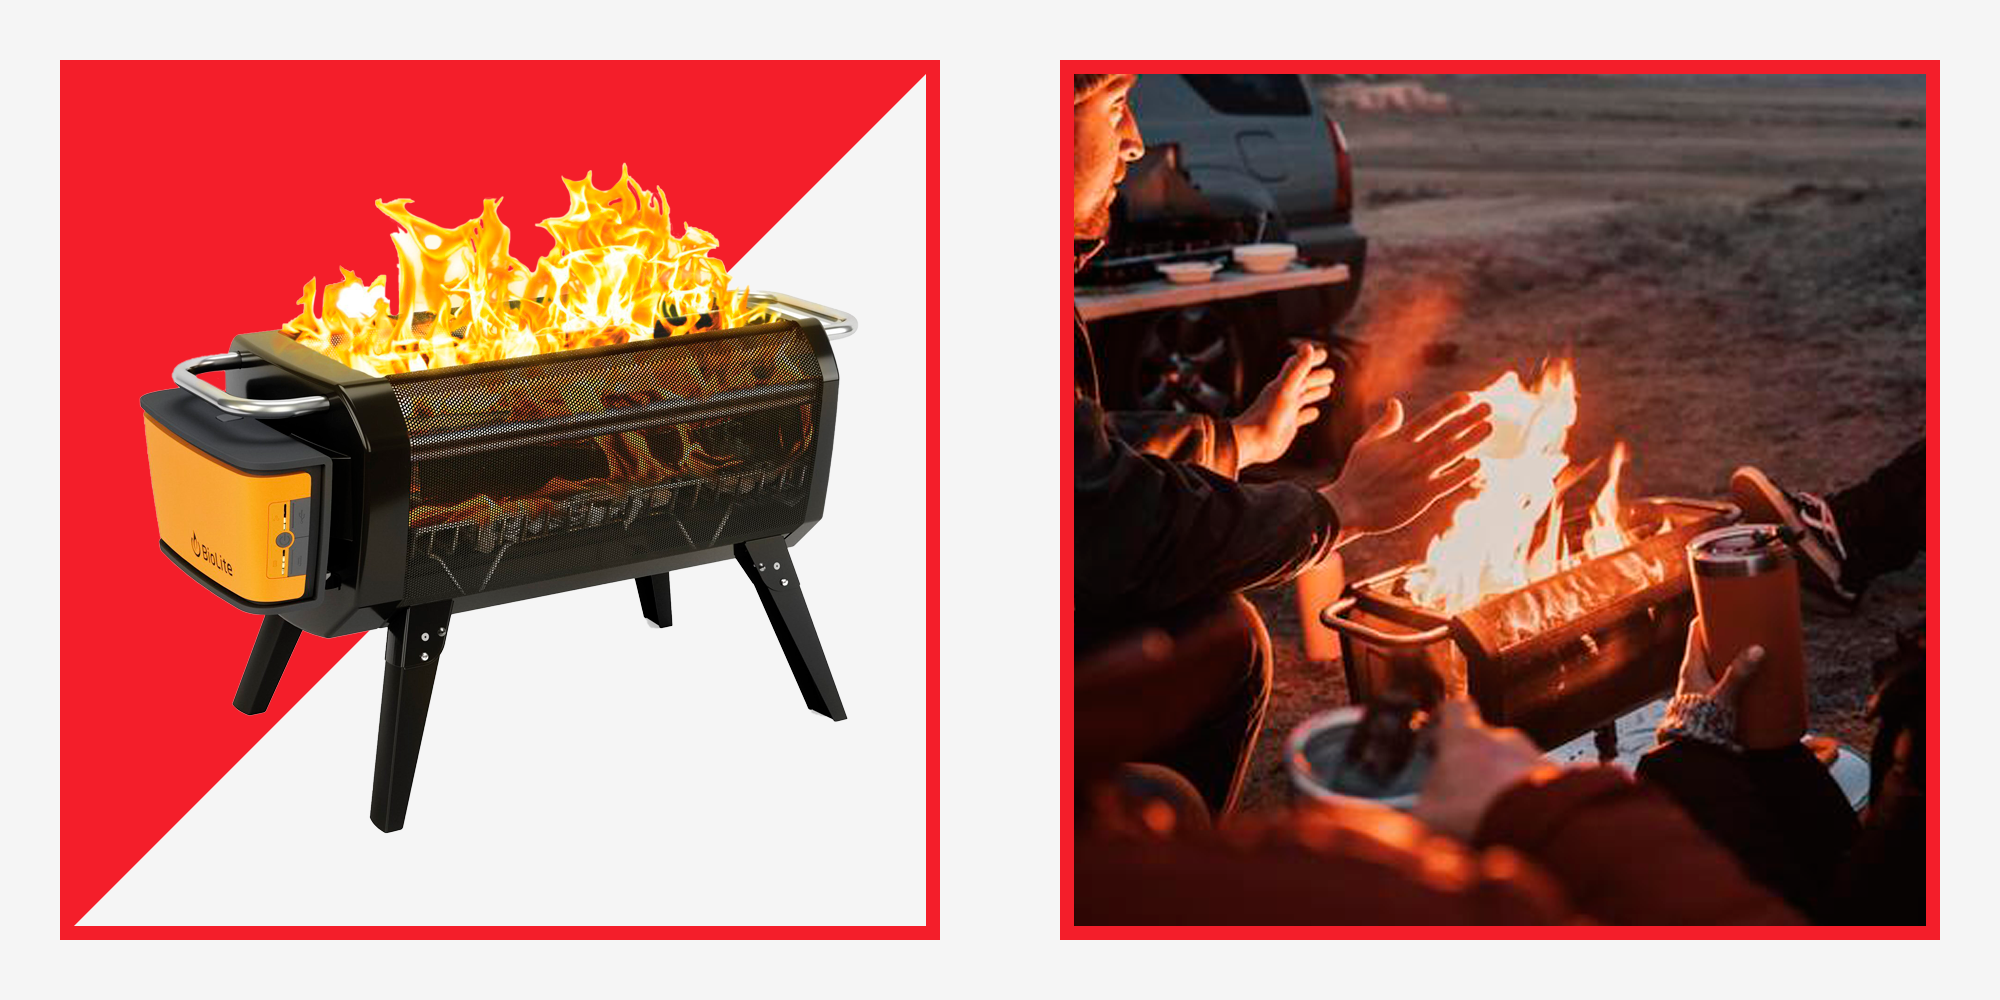 BioLite FirePit Cooking Kit  Smokeless Fire Pit & Accessories